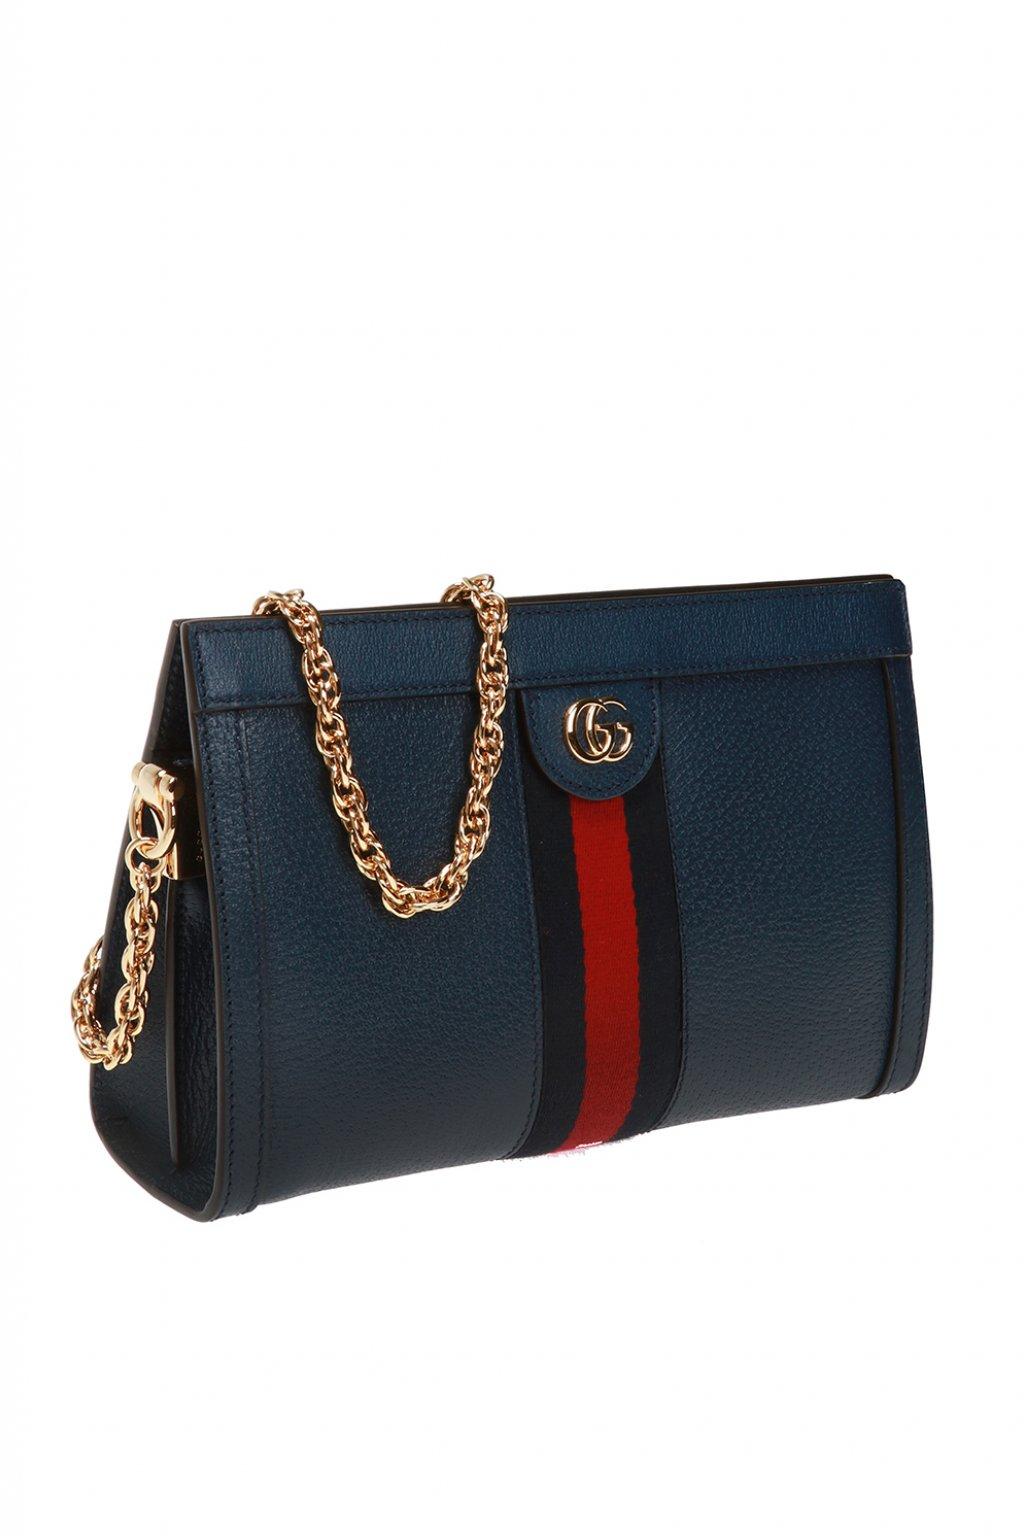 gucci ophidia navy